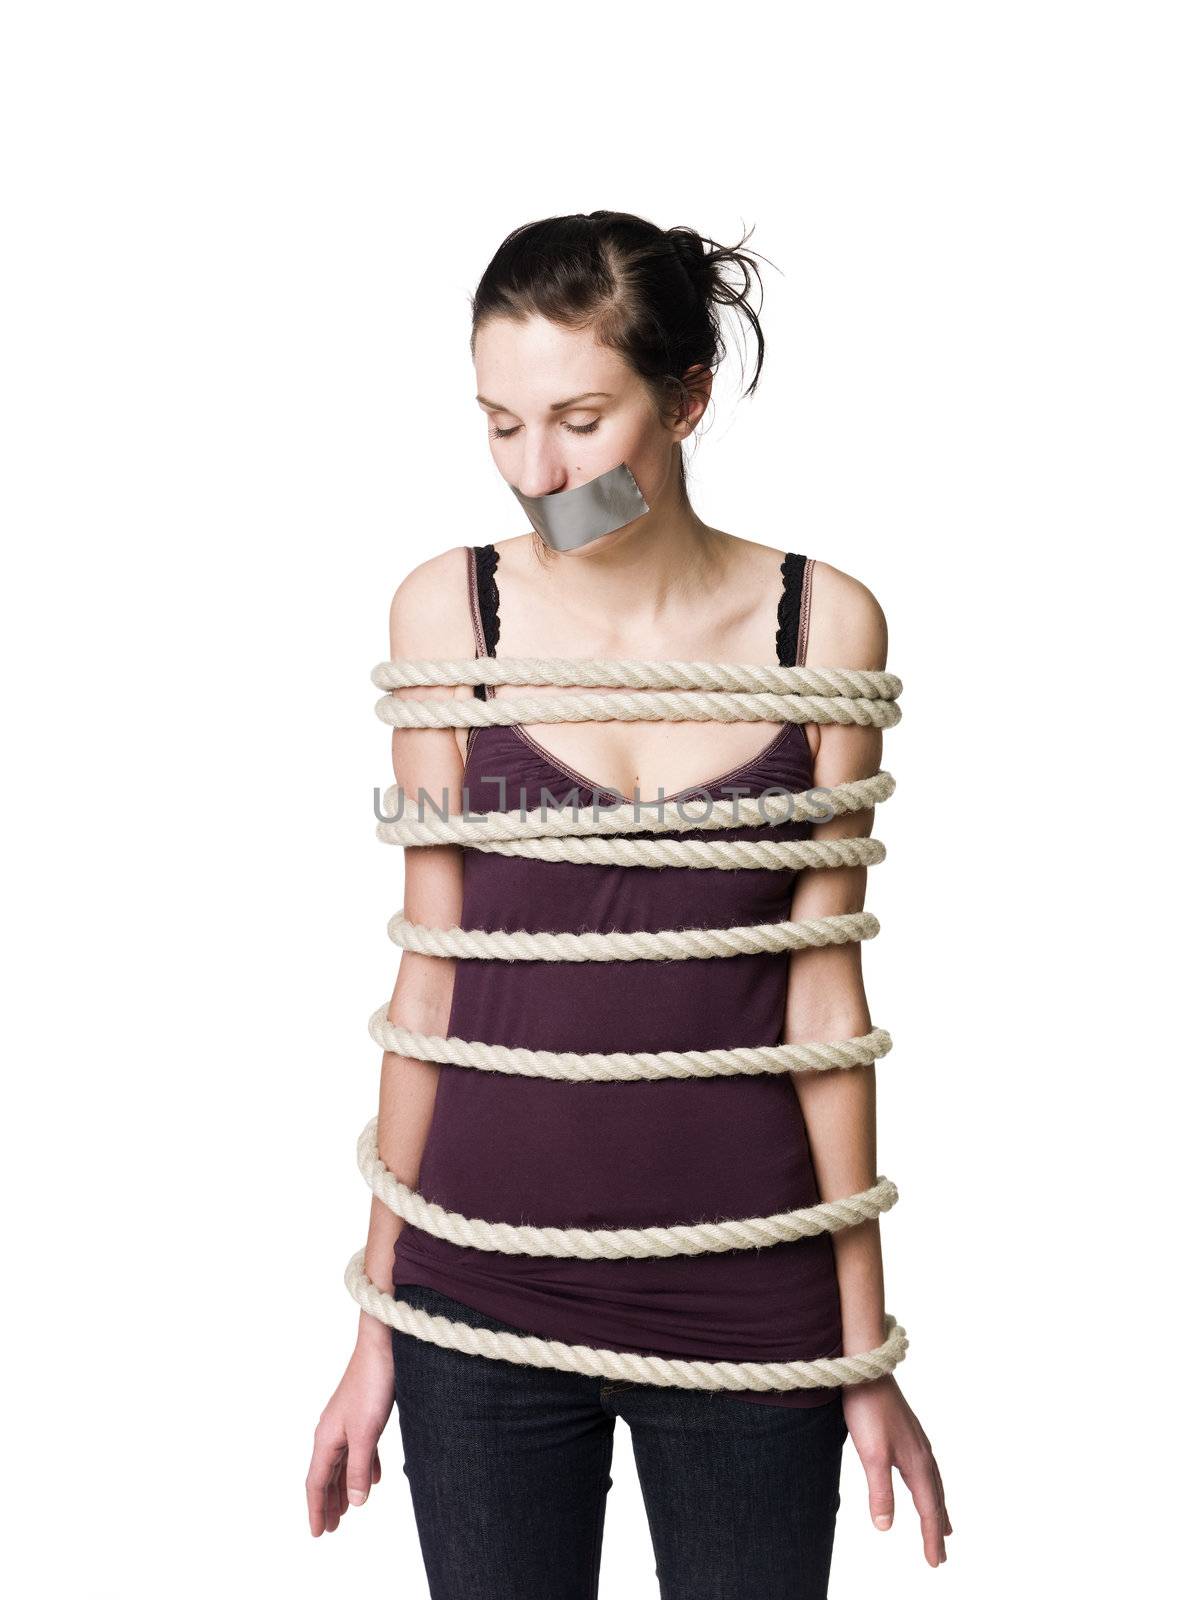 Tied up woman with tape over her mouth by gemenacom